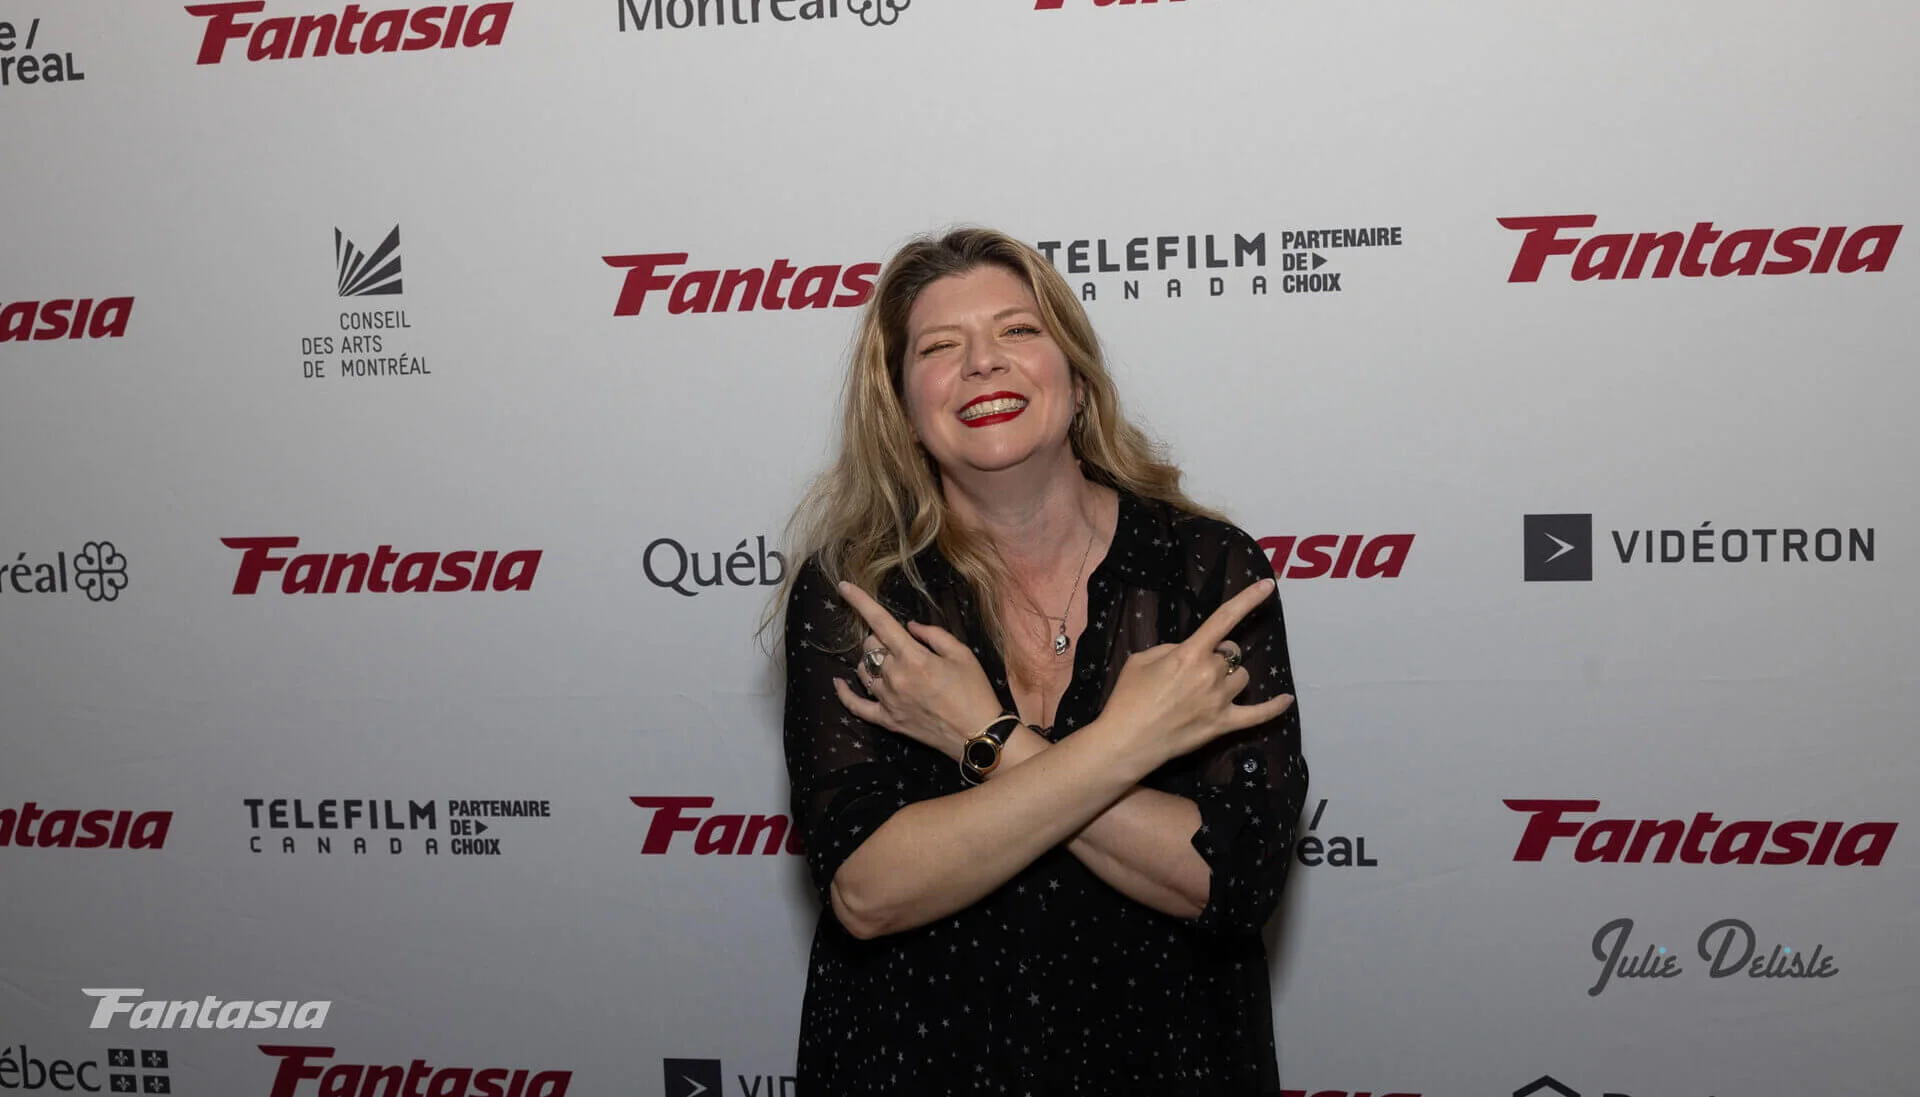 Izzy Lee at the Fantasia Film Festival Red Carpet giving the devil horns with both hands